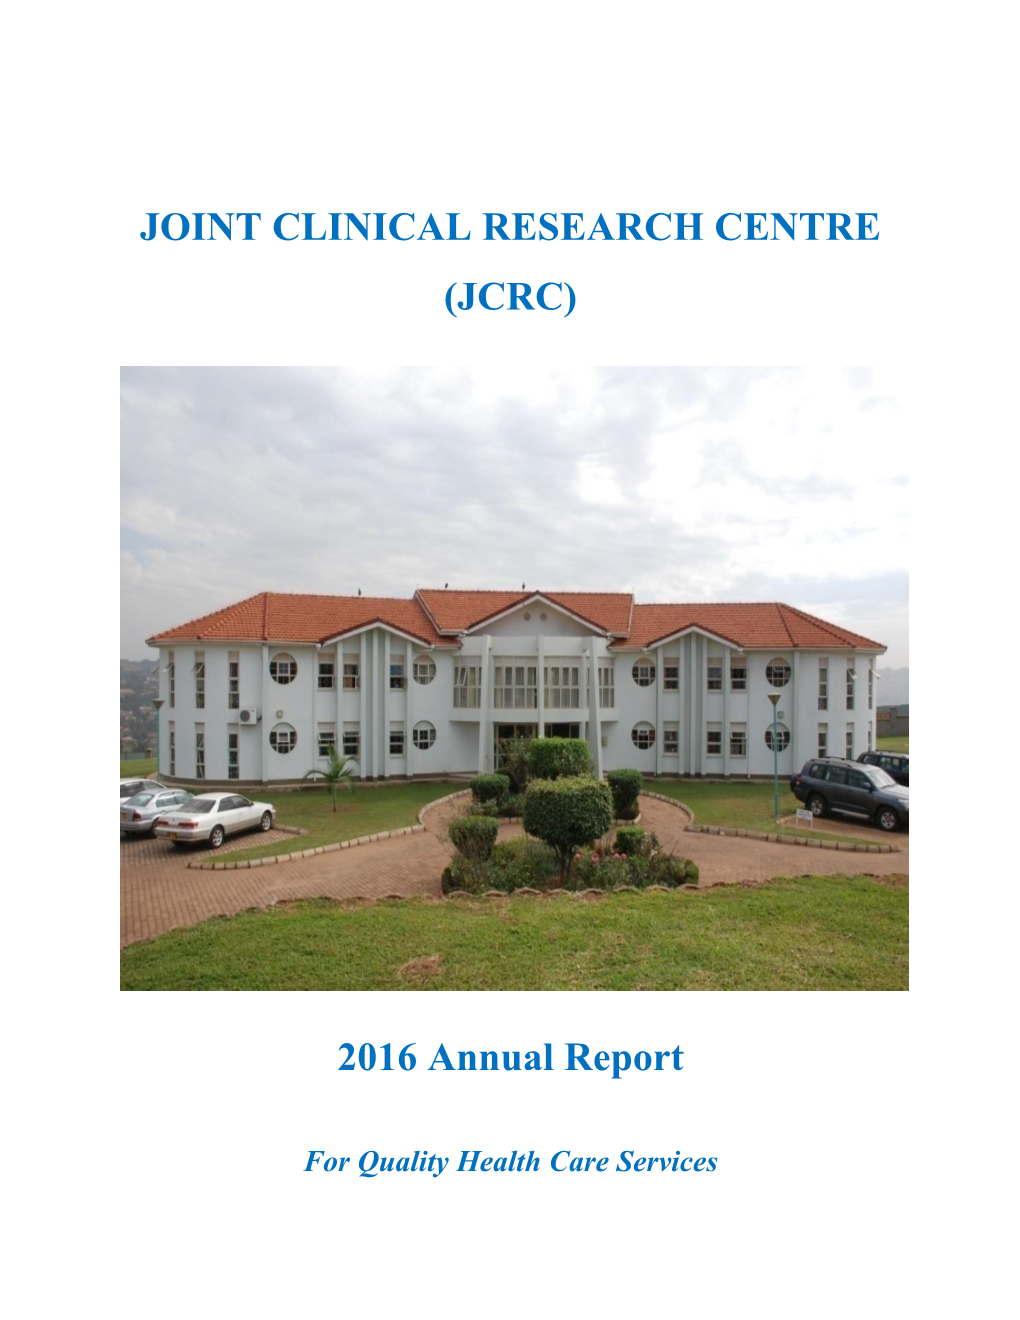 JOINT CLINICAL RESEARCH CENTRE (JCRC) 2016 Annual Report